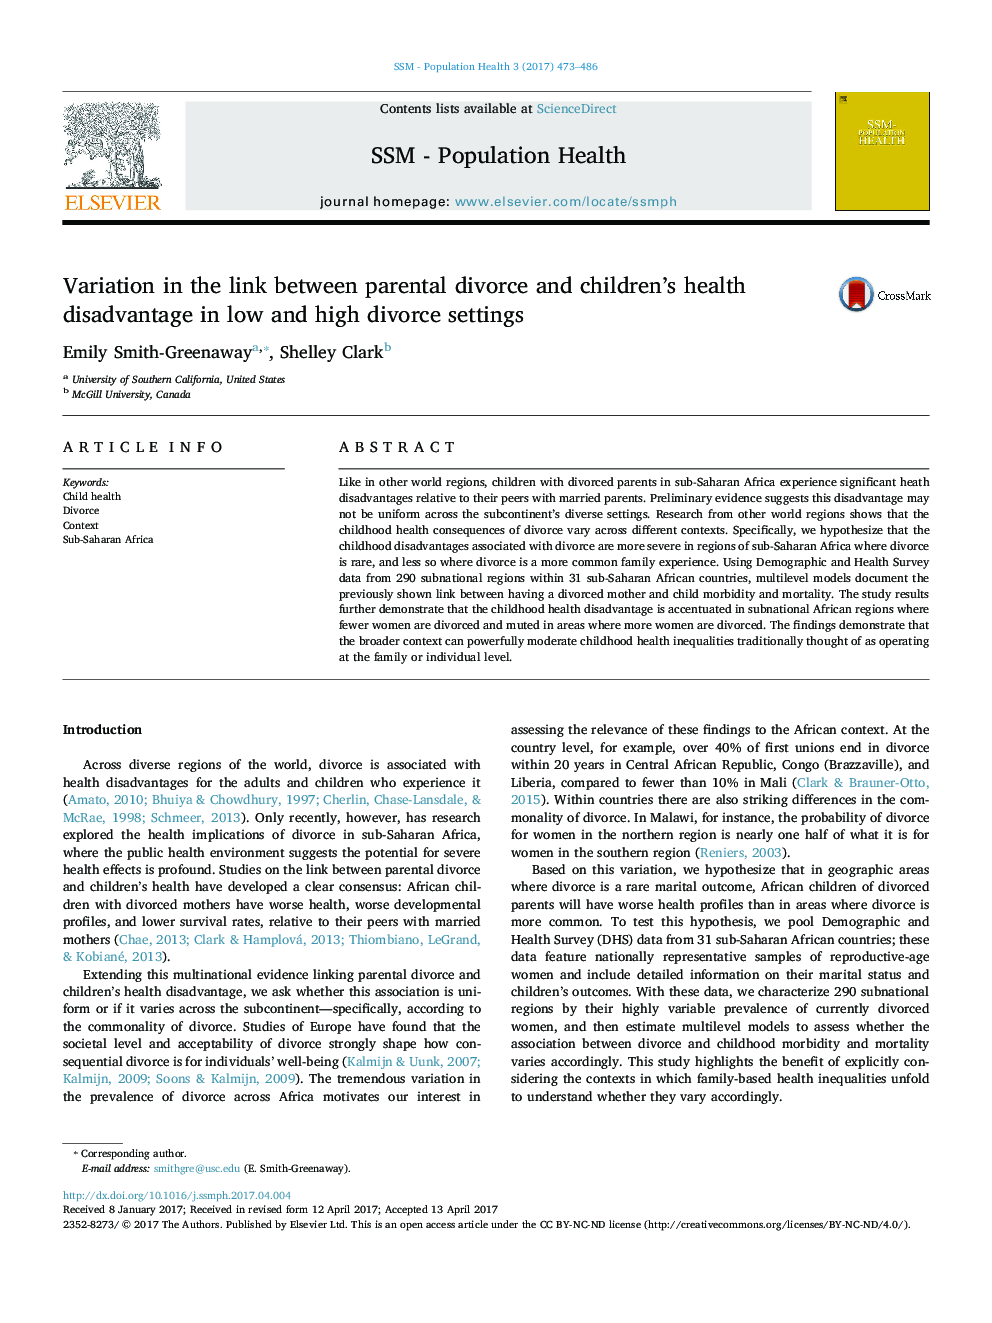 Variation in the link between parental divorce and children's health disadvantage in low and high divorce settings